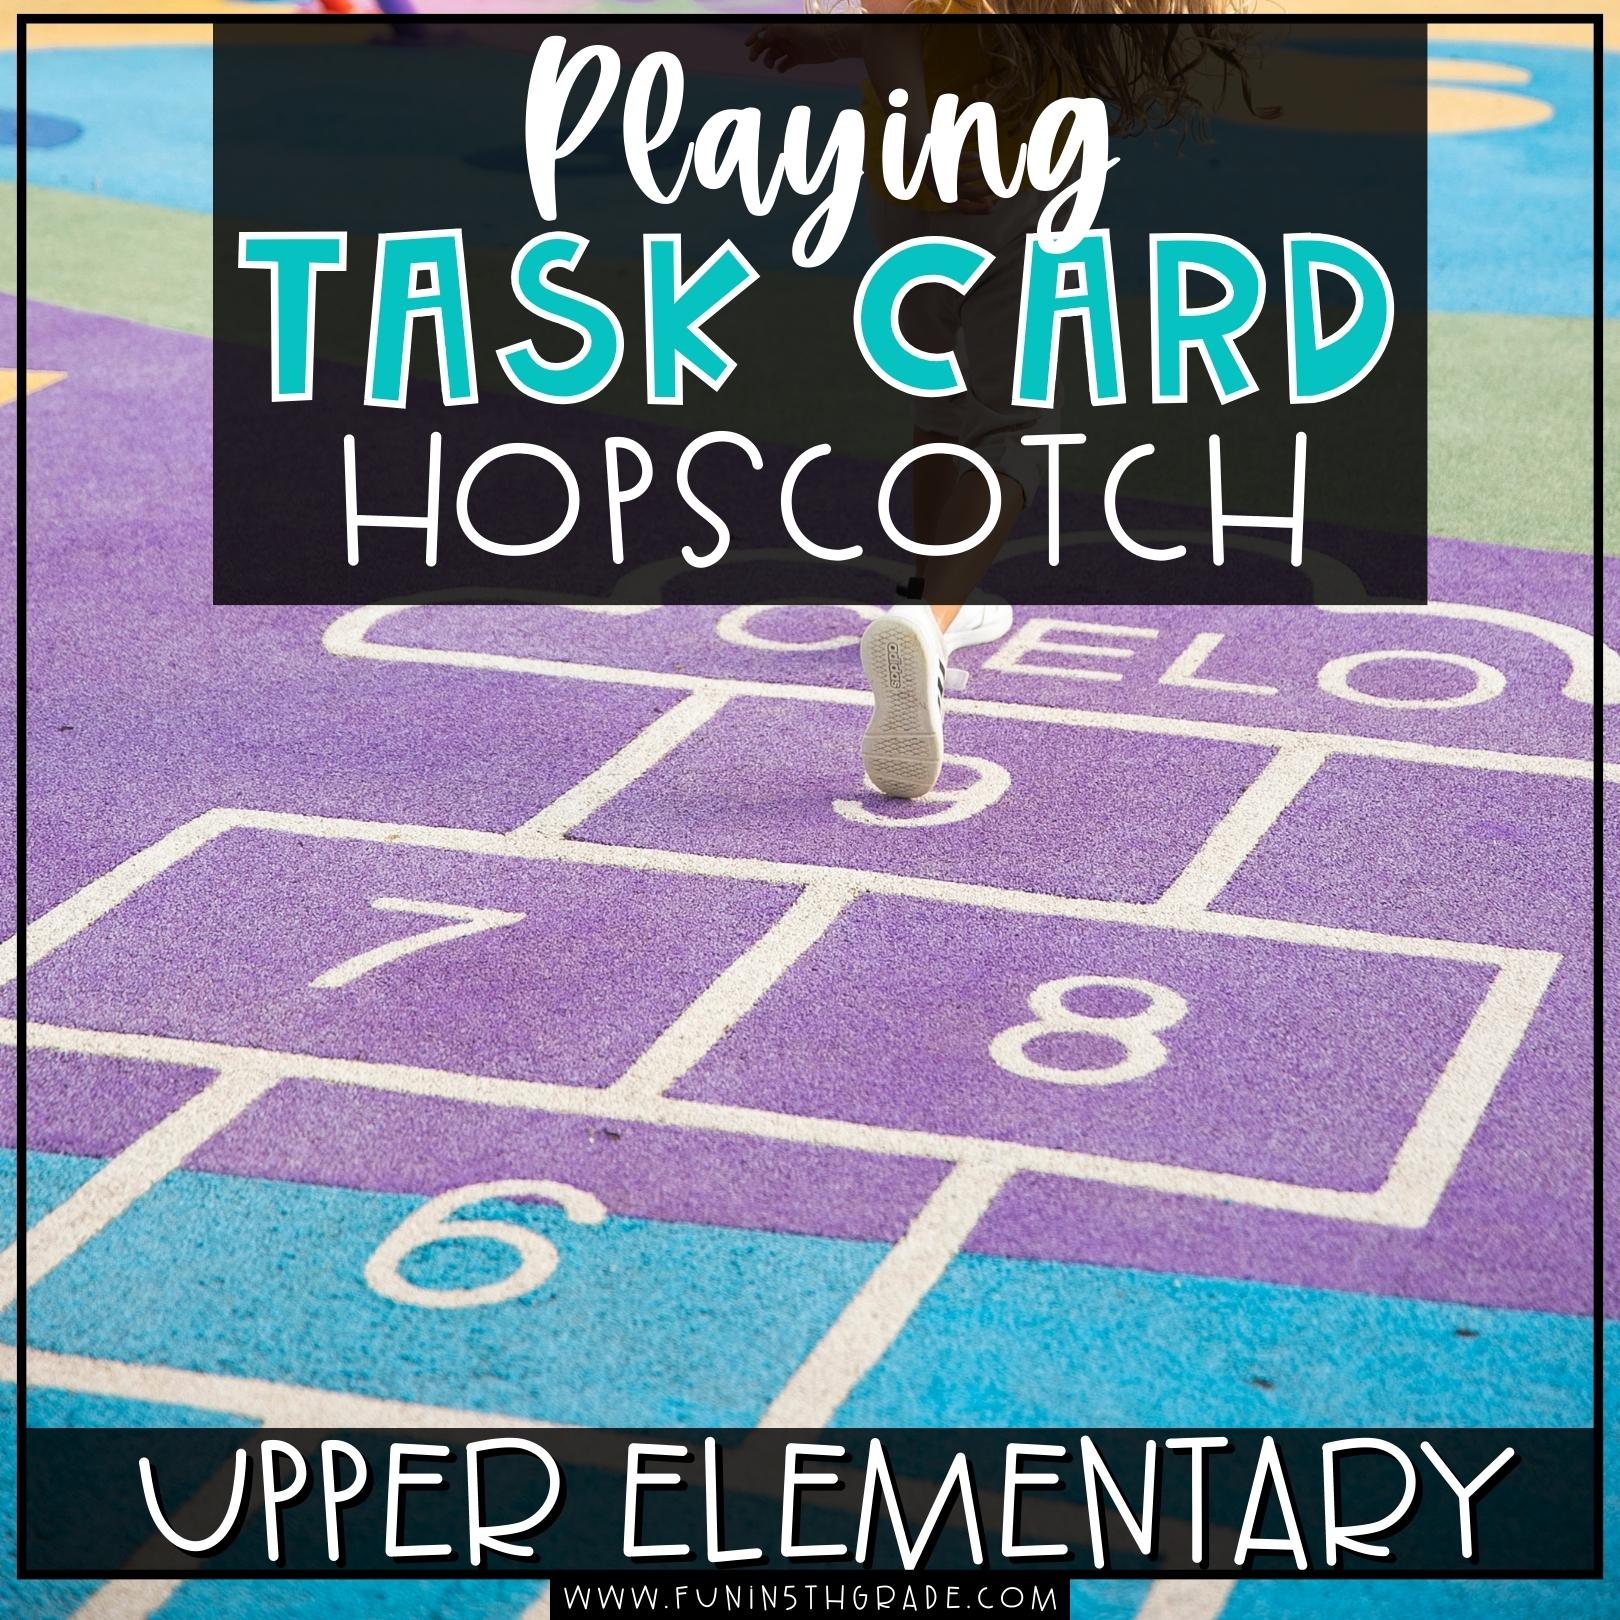 Playing Task Card Hopscotch Blog Image with Chalk Hopscotch outline on concrete background